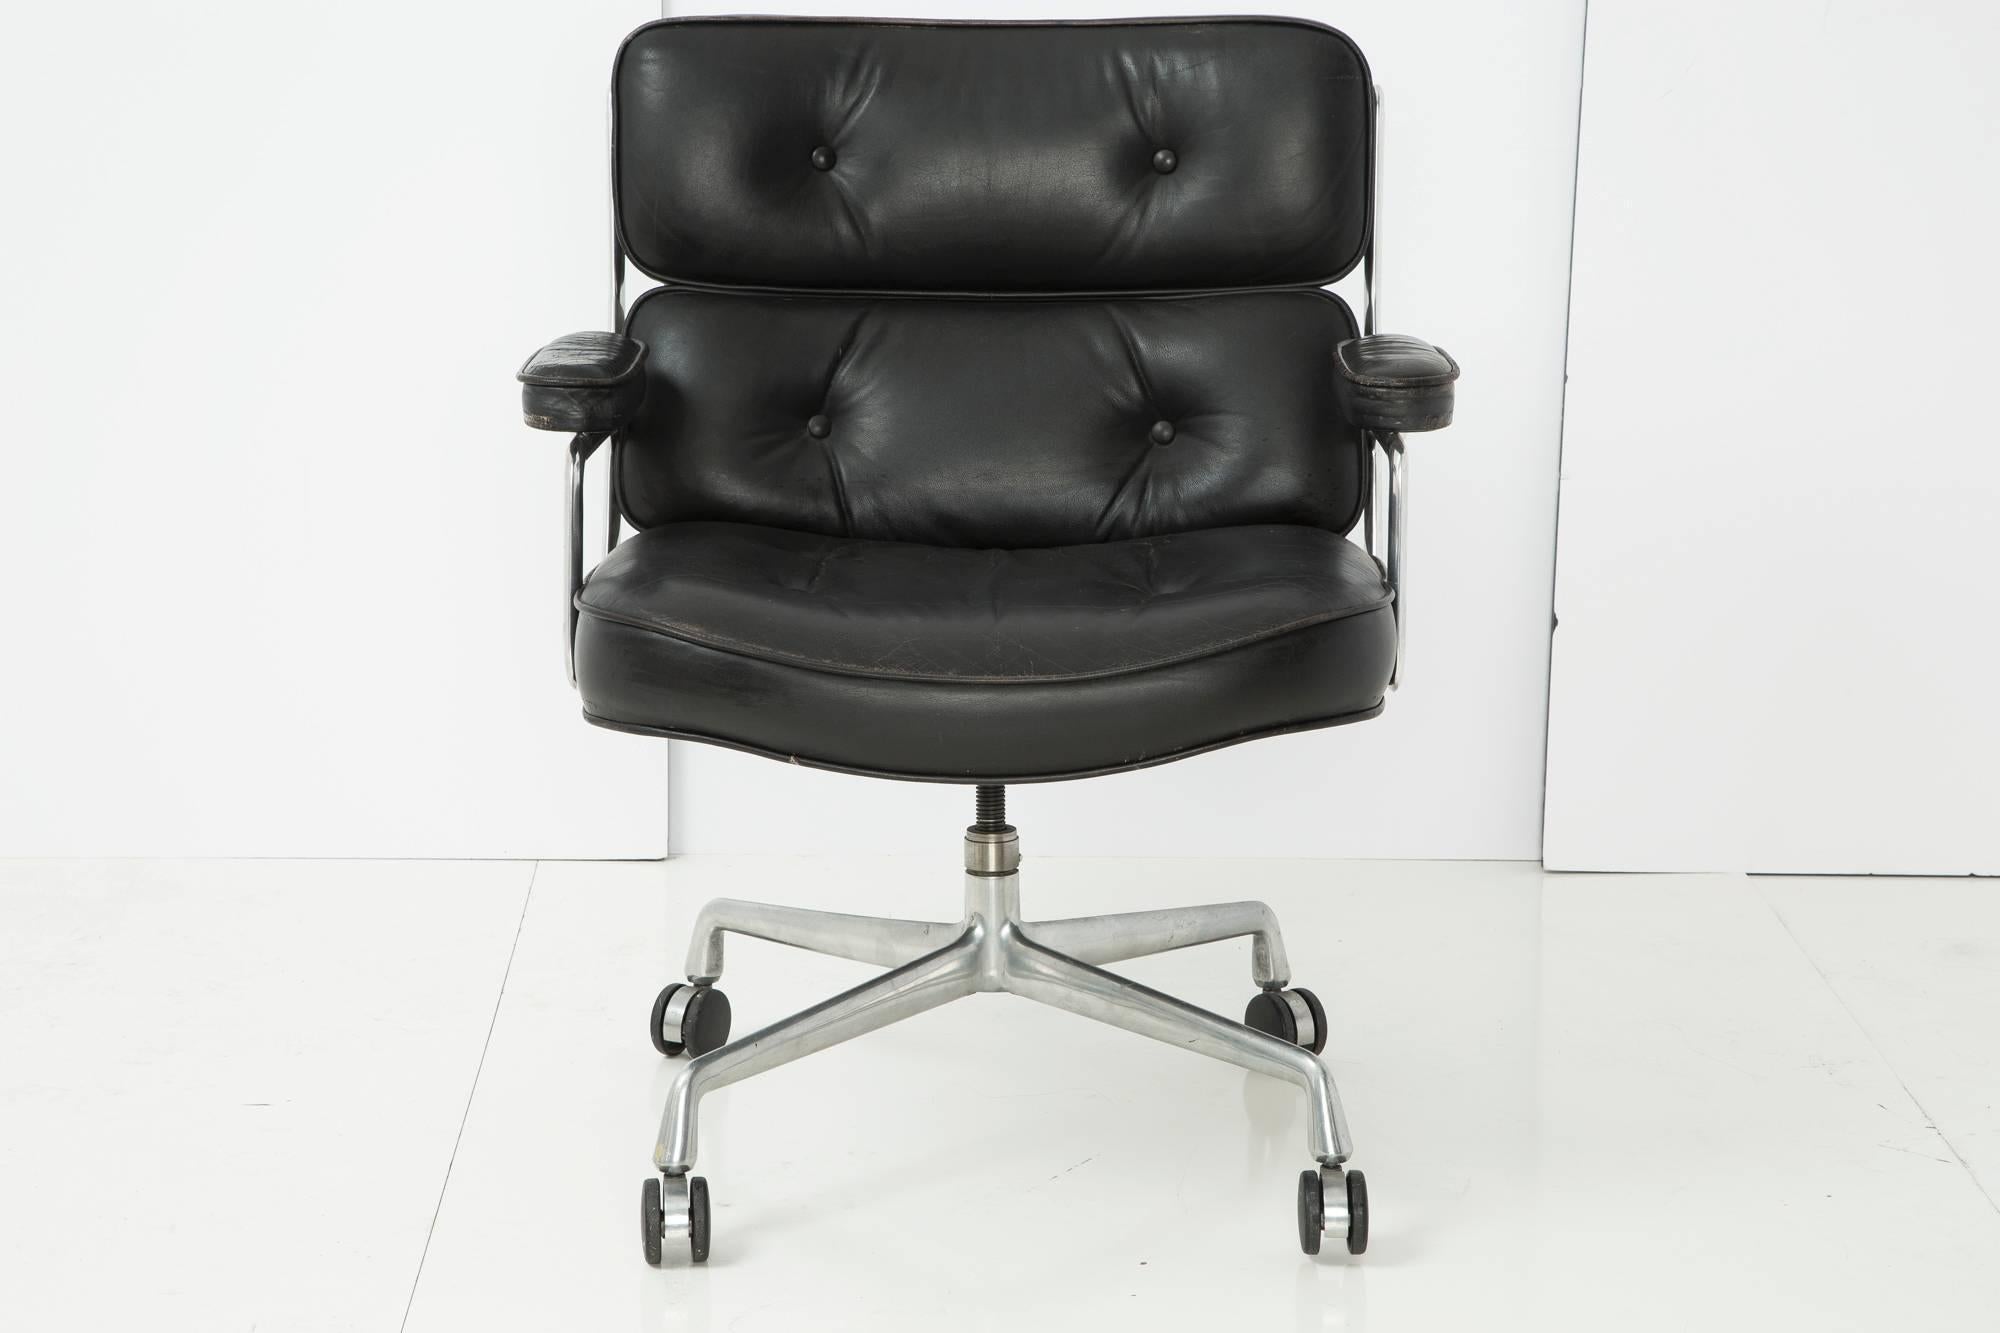 Likely the most iconic desk chair design in Mid-Century Modern furniture, by none other than the incomparable Ray & Charles Eames. This office chair swivels in its brushed aluminum frame, rolls on four casters, and is upholstered in black tufted